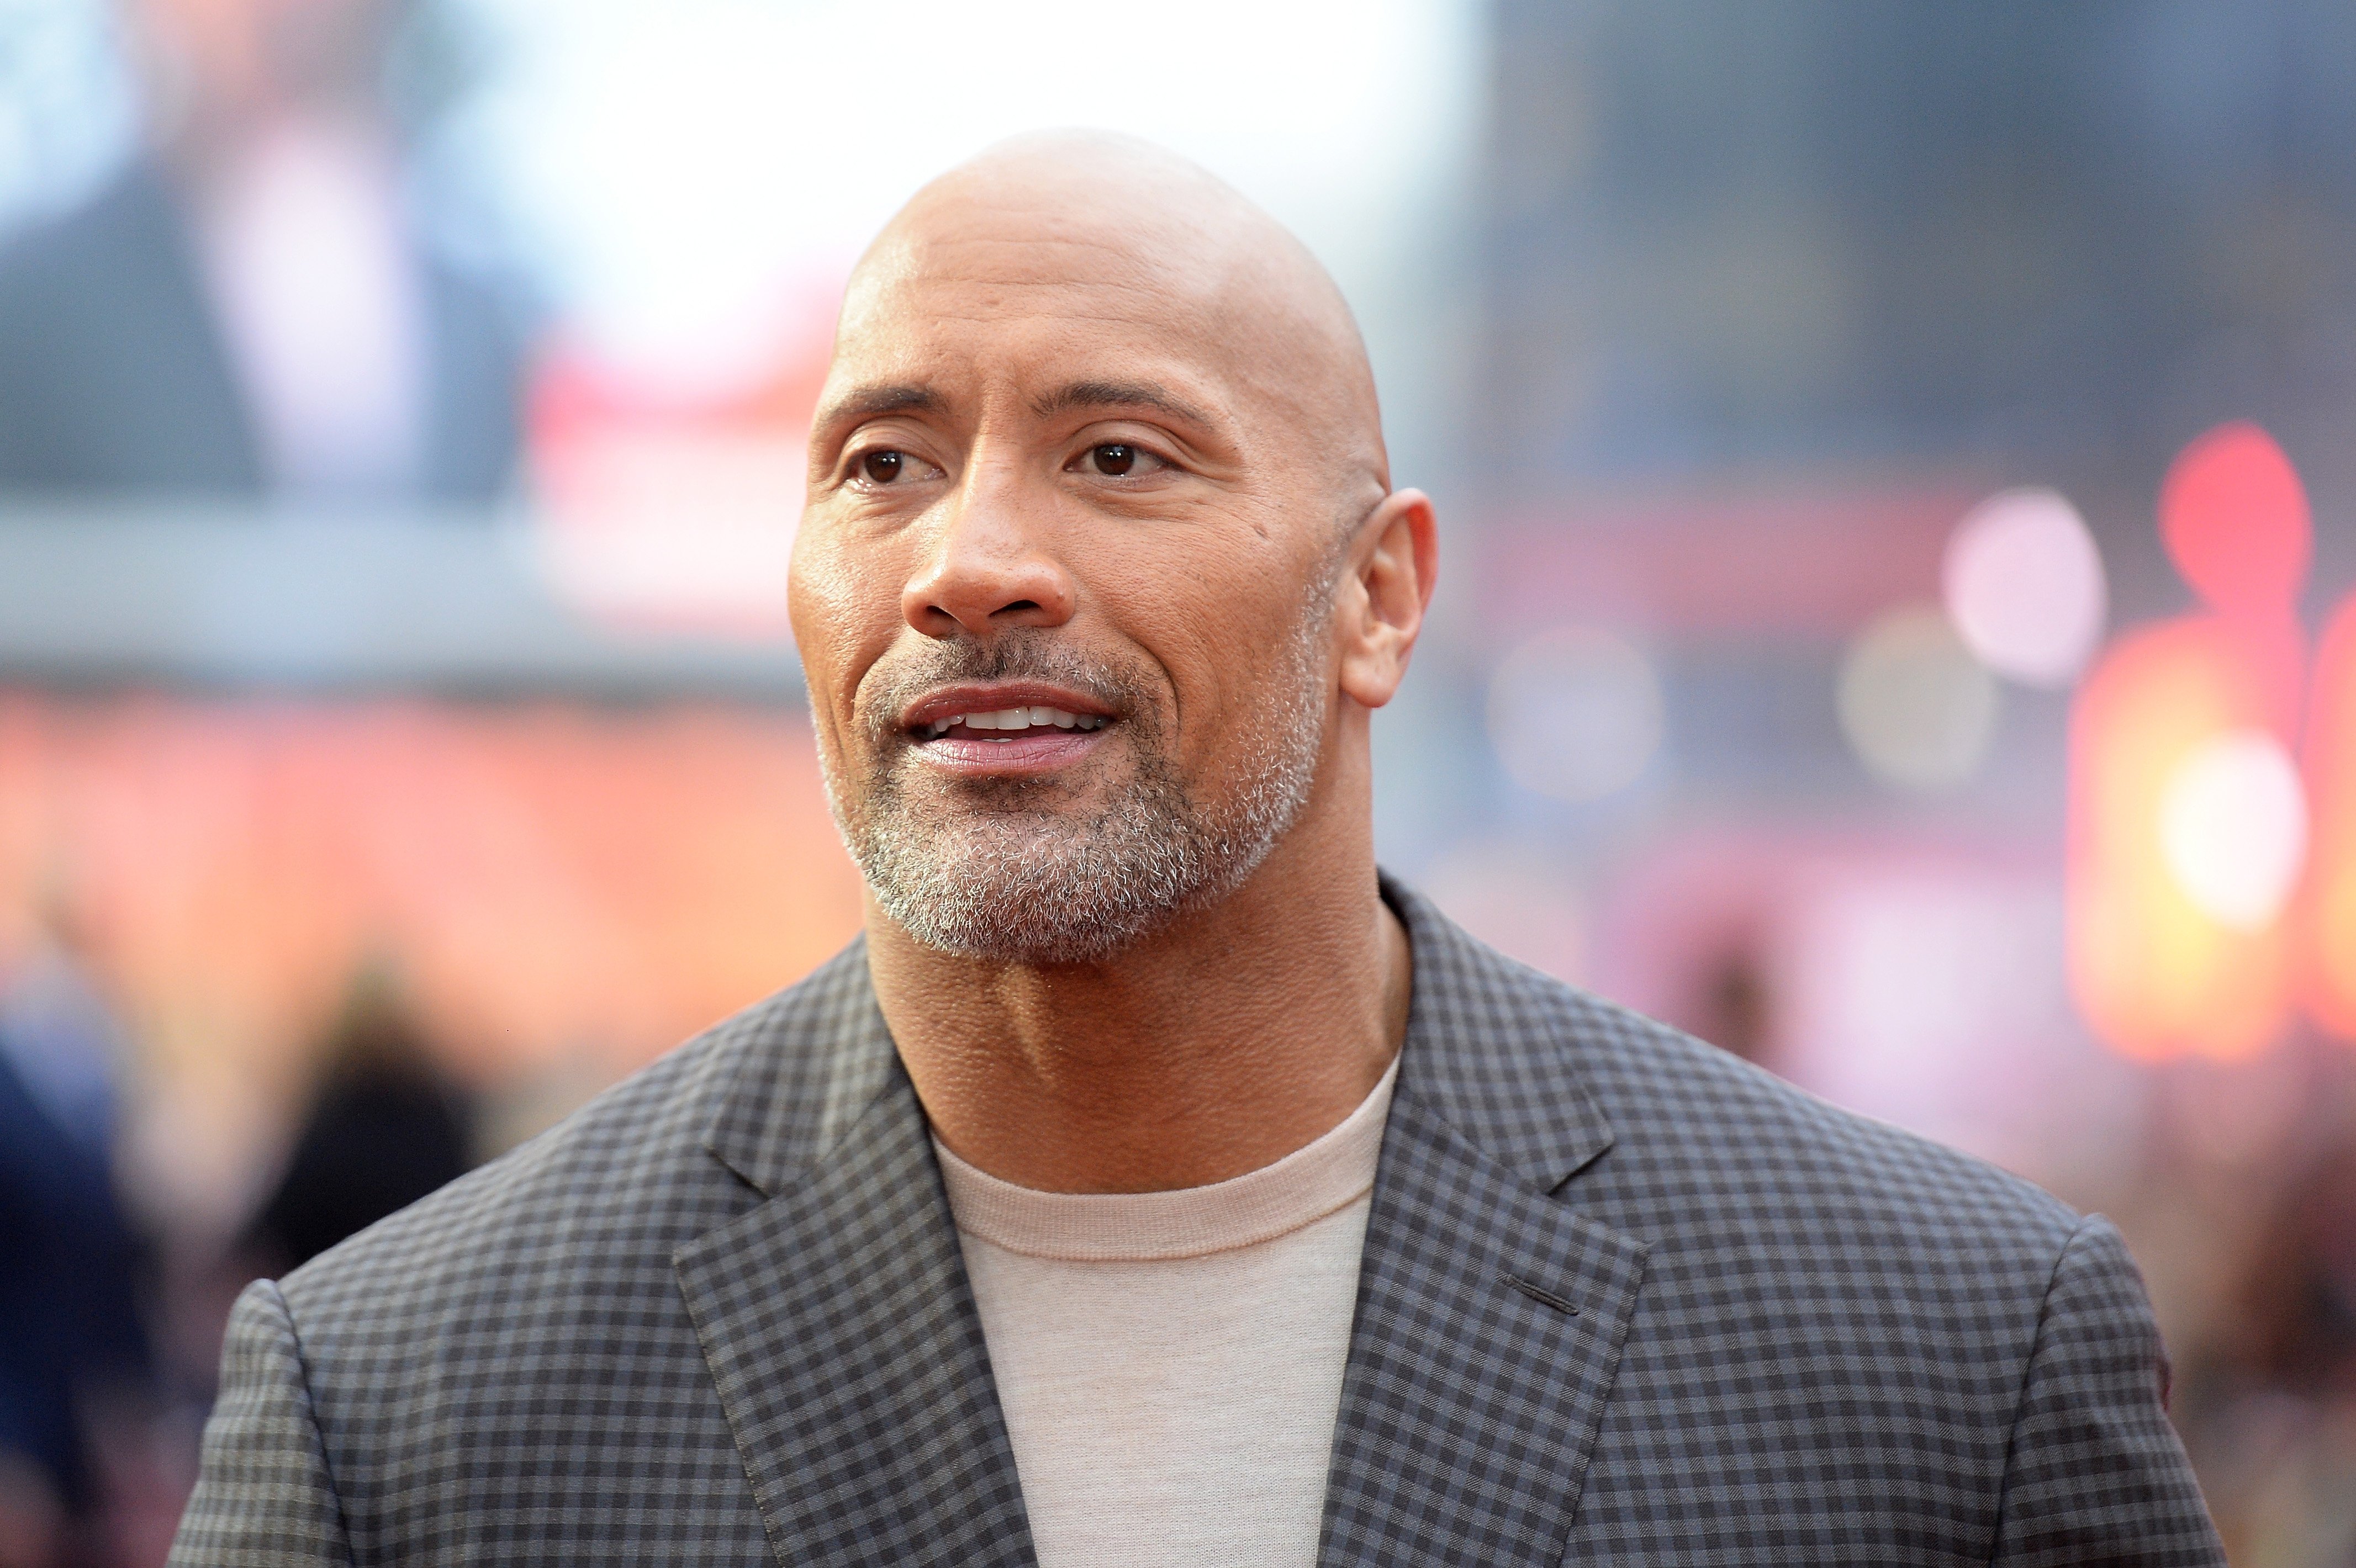 Dwayne Johnson during the European premiere of "Rampage" in April 2018. | Photo: Getty Images